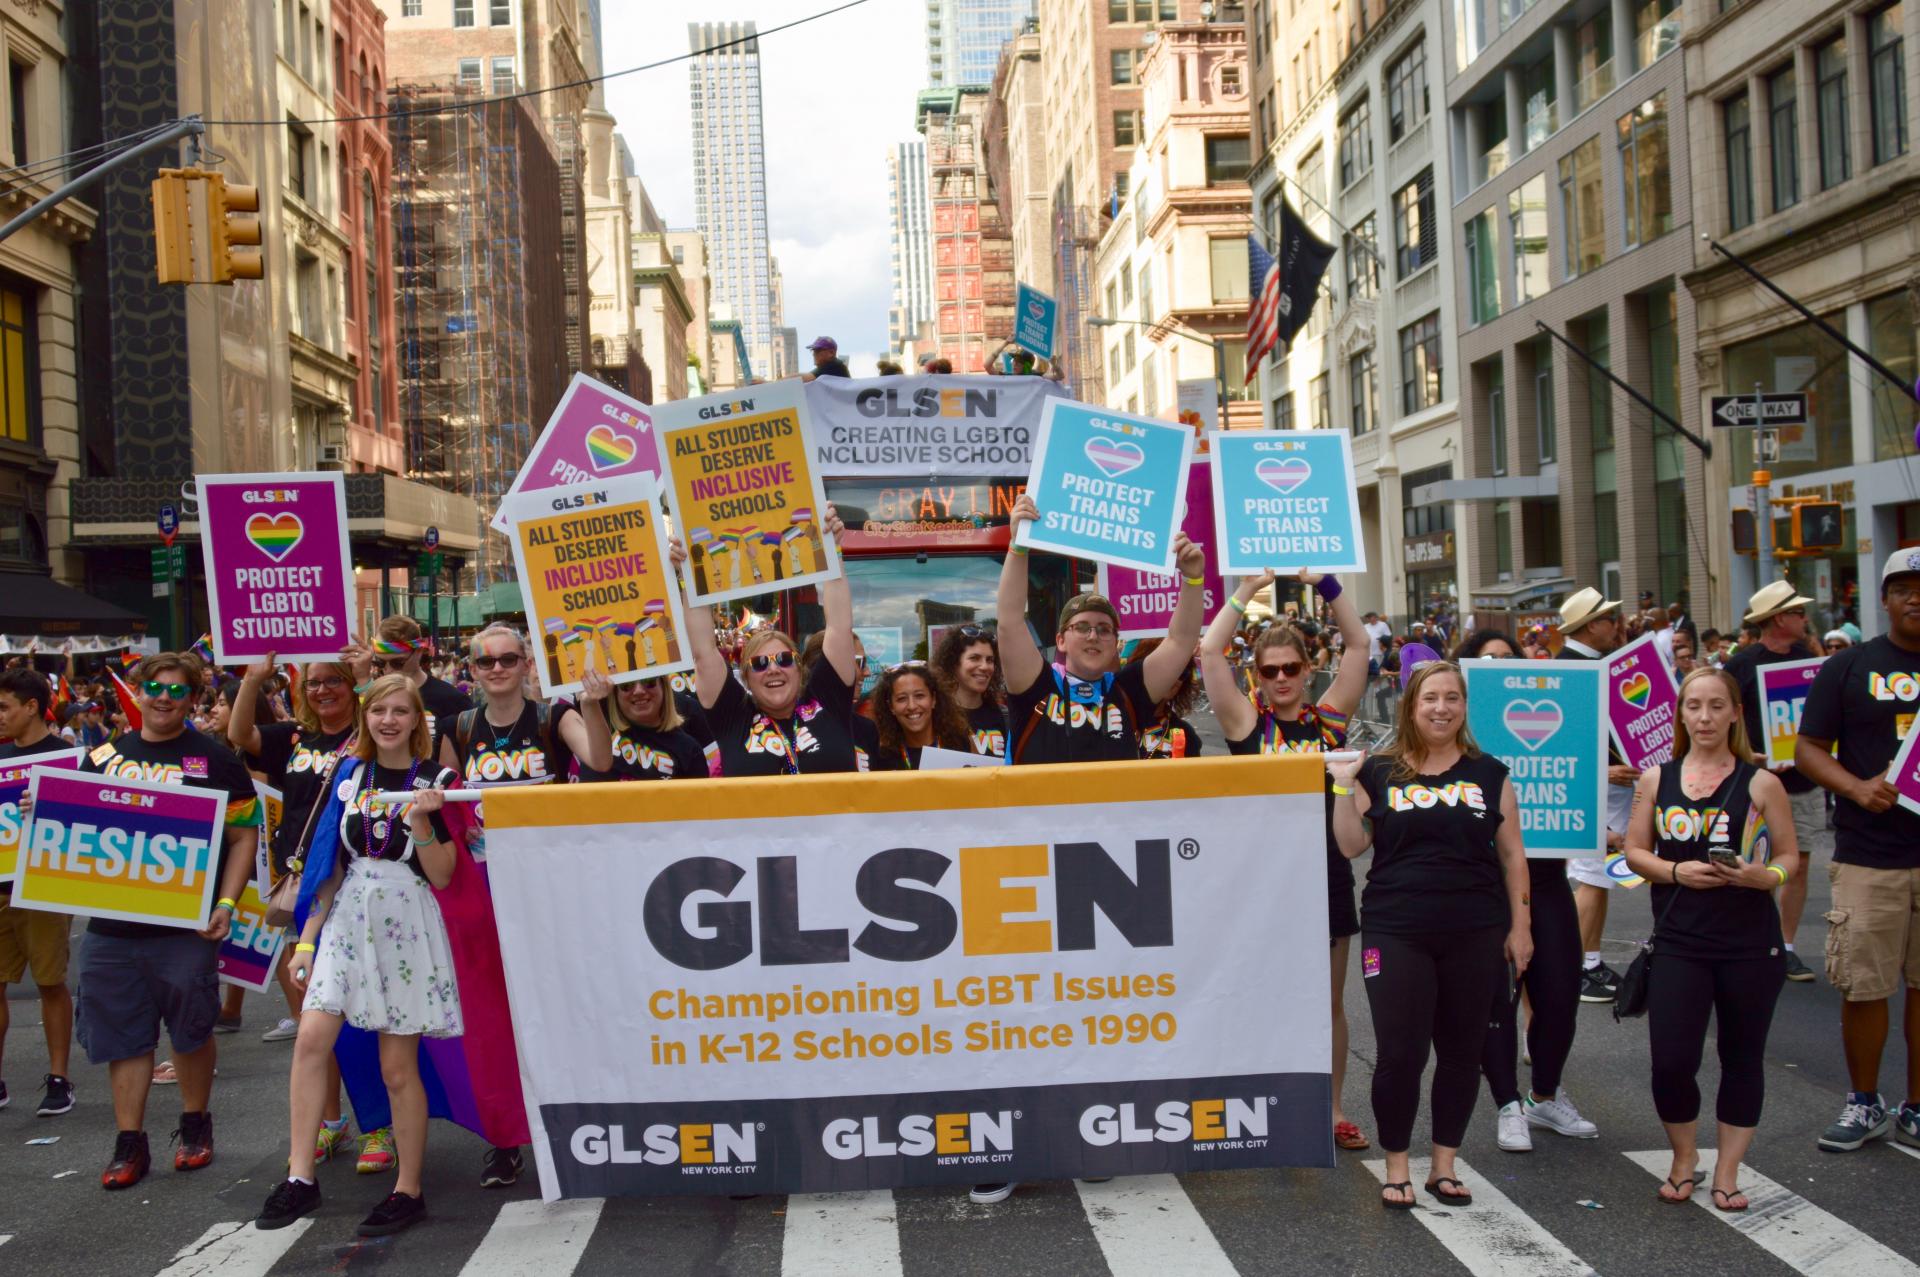 Disney donates $100,000 to GLSEN in recognition of Pride Month 2020